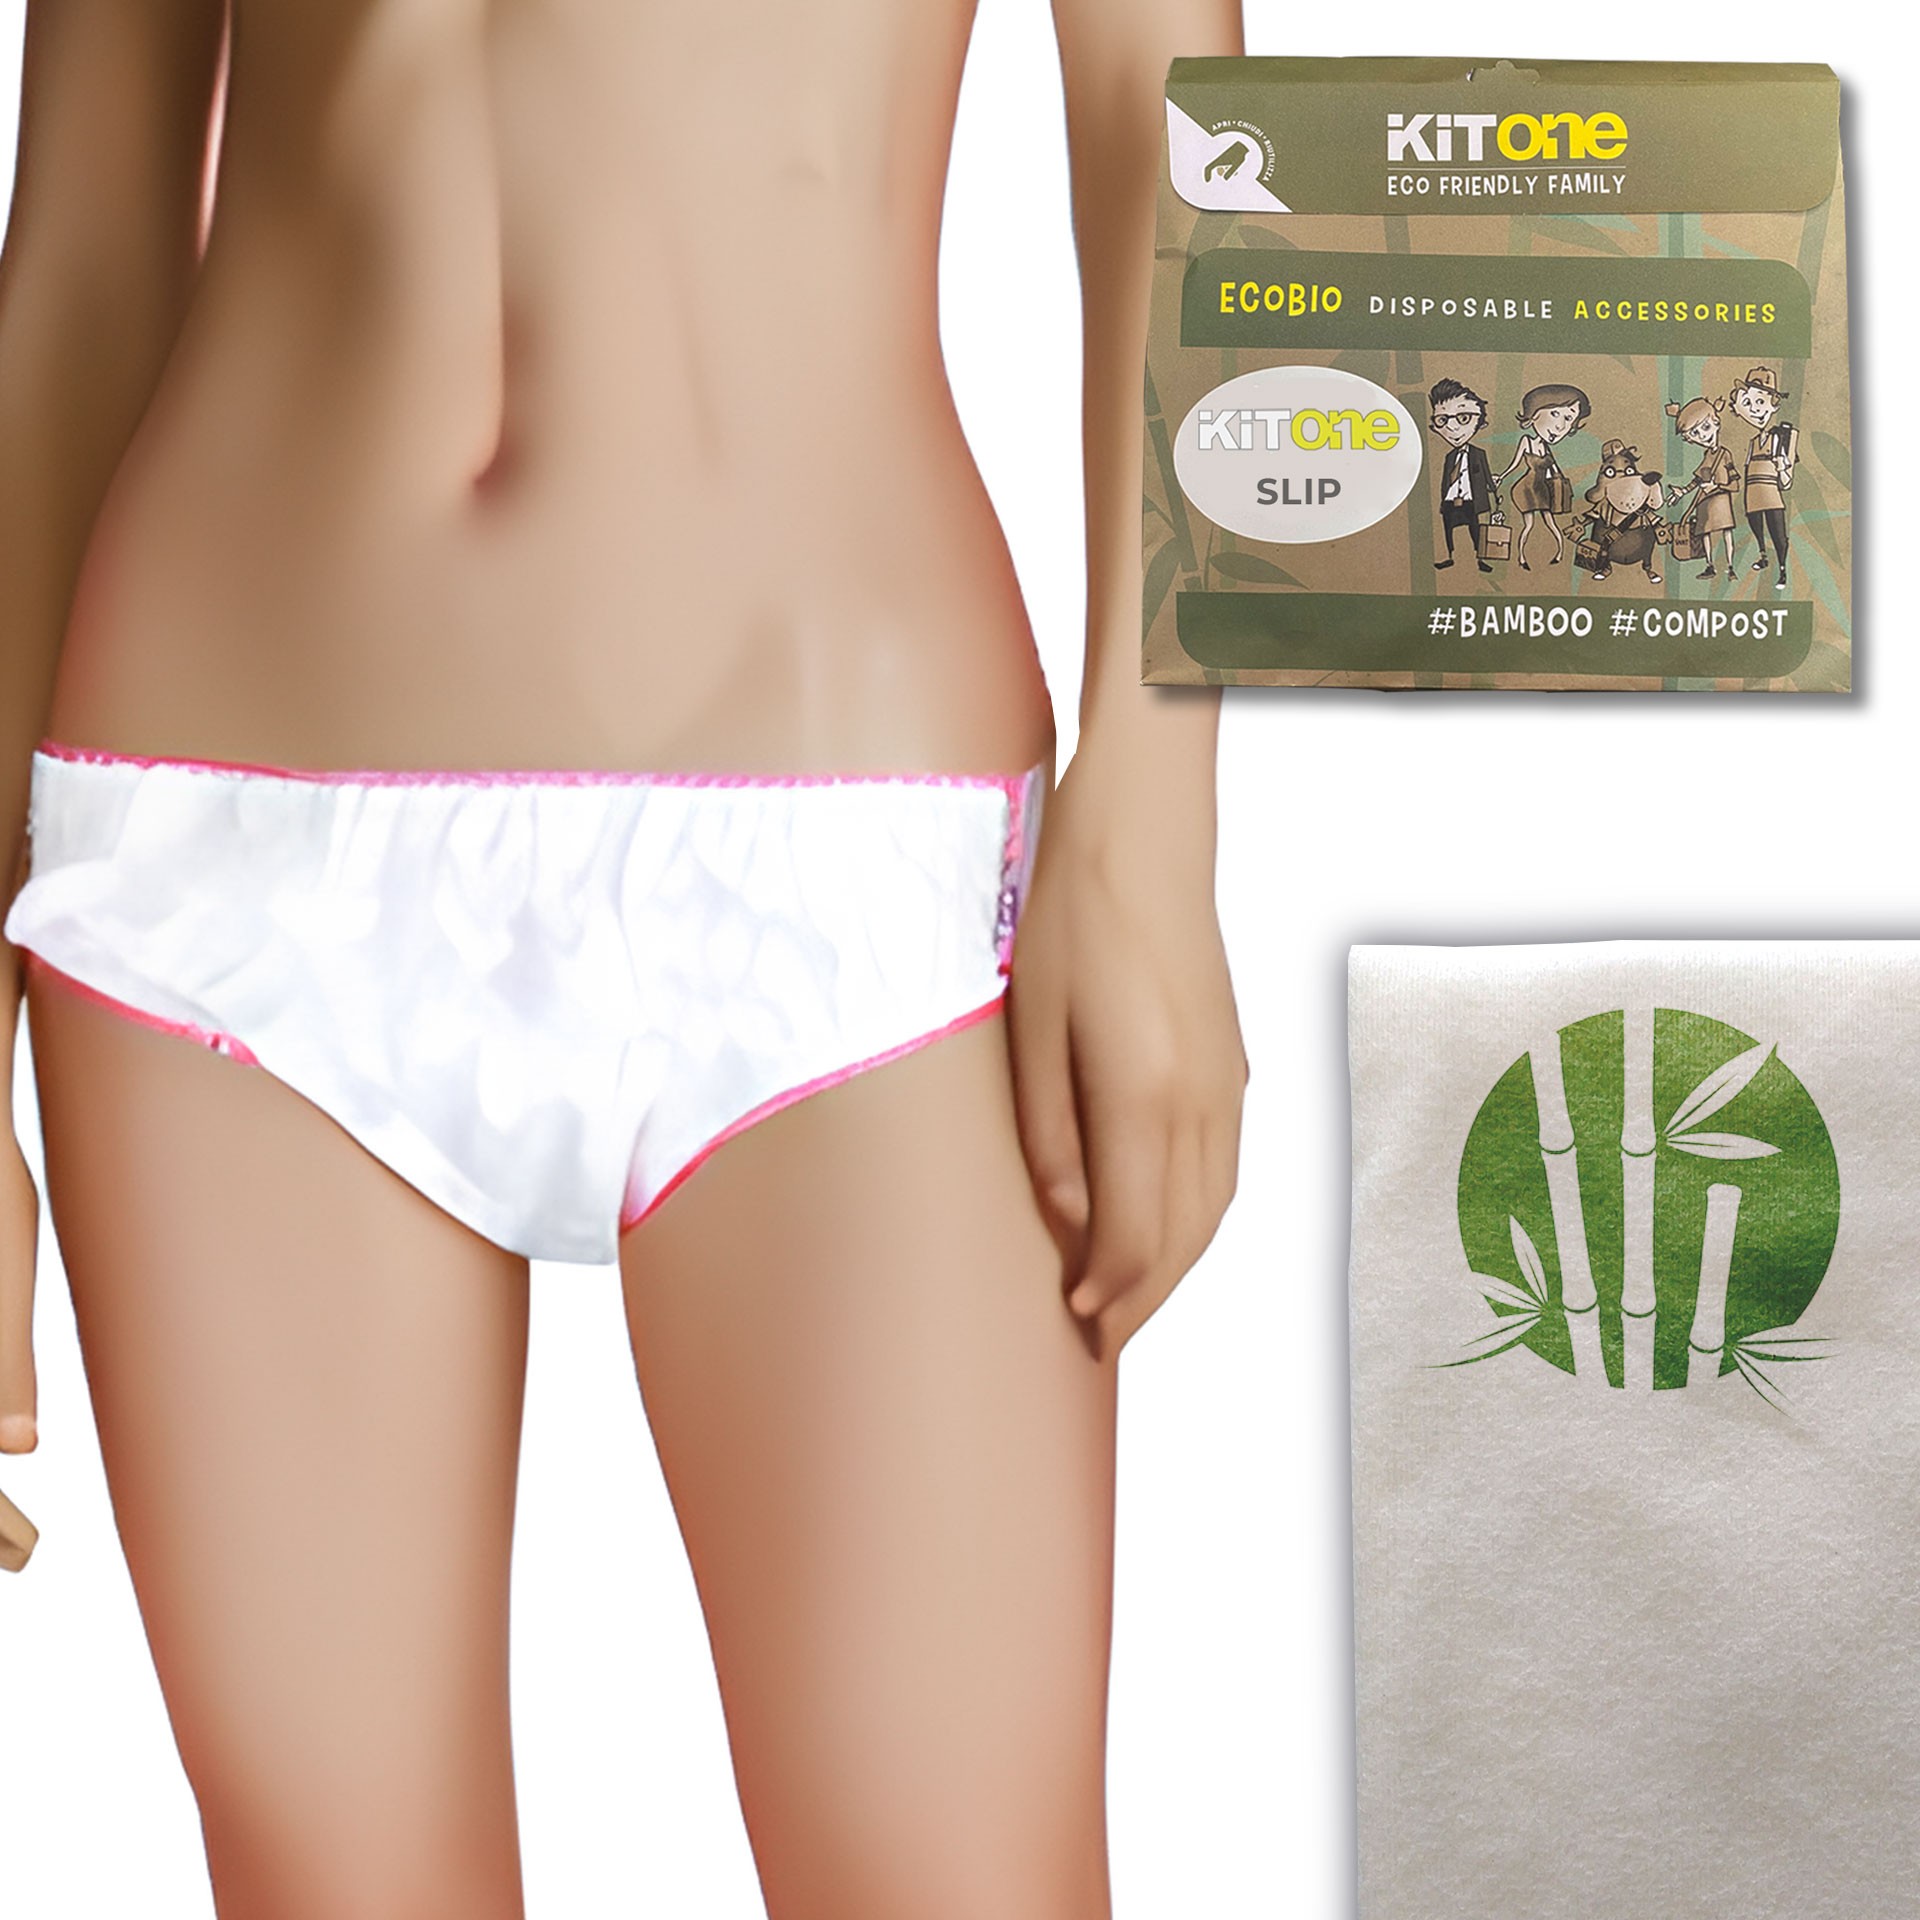 https://www.medicalsud.it/2785/20-women-s-eco-bio-disposable-briefs-in-comfortable-and-practical-bamboo-fiber.jpg